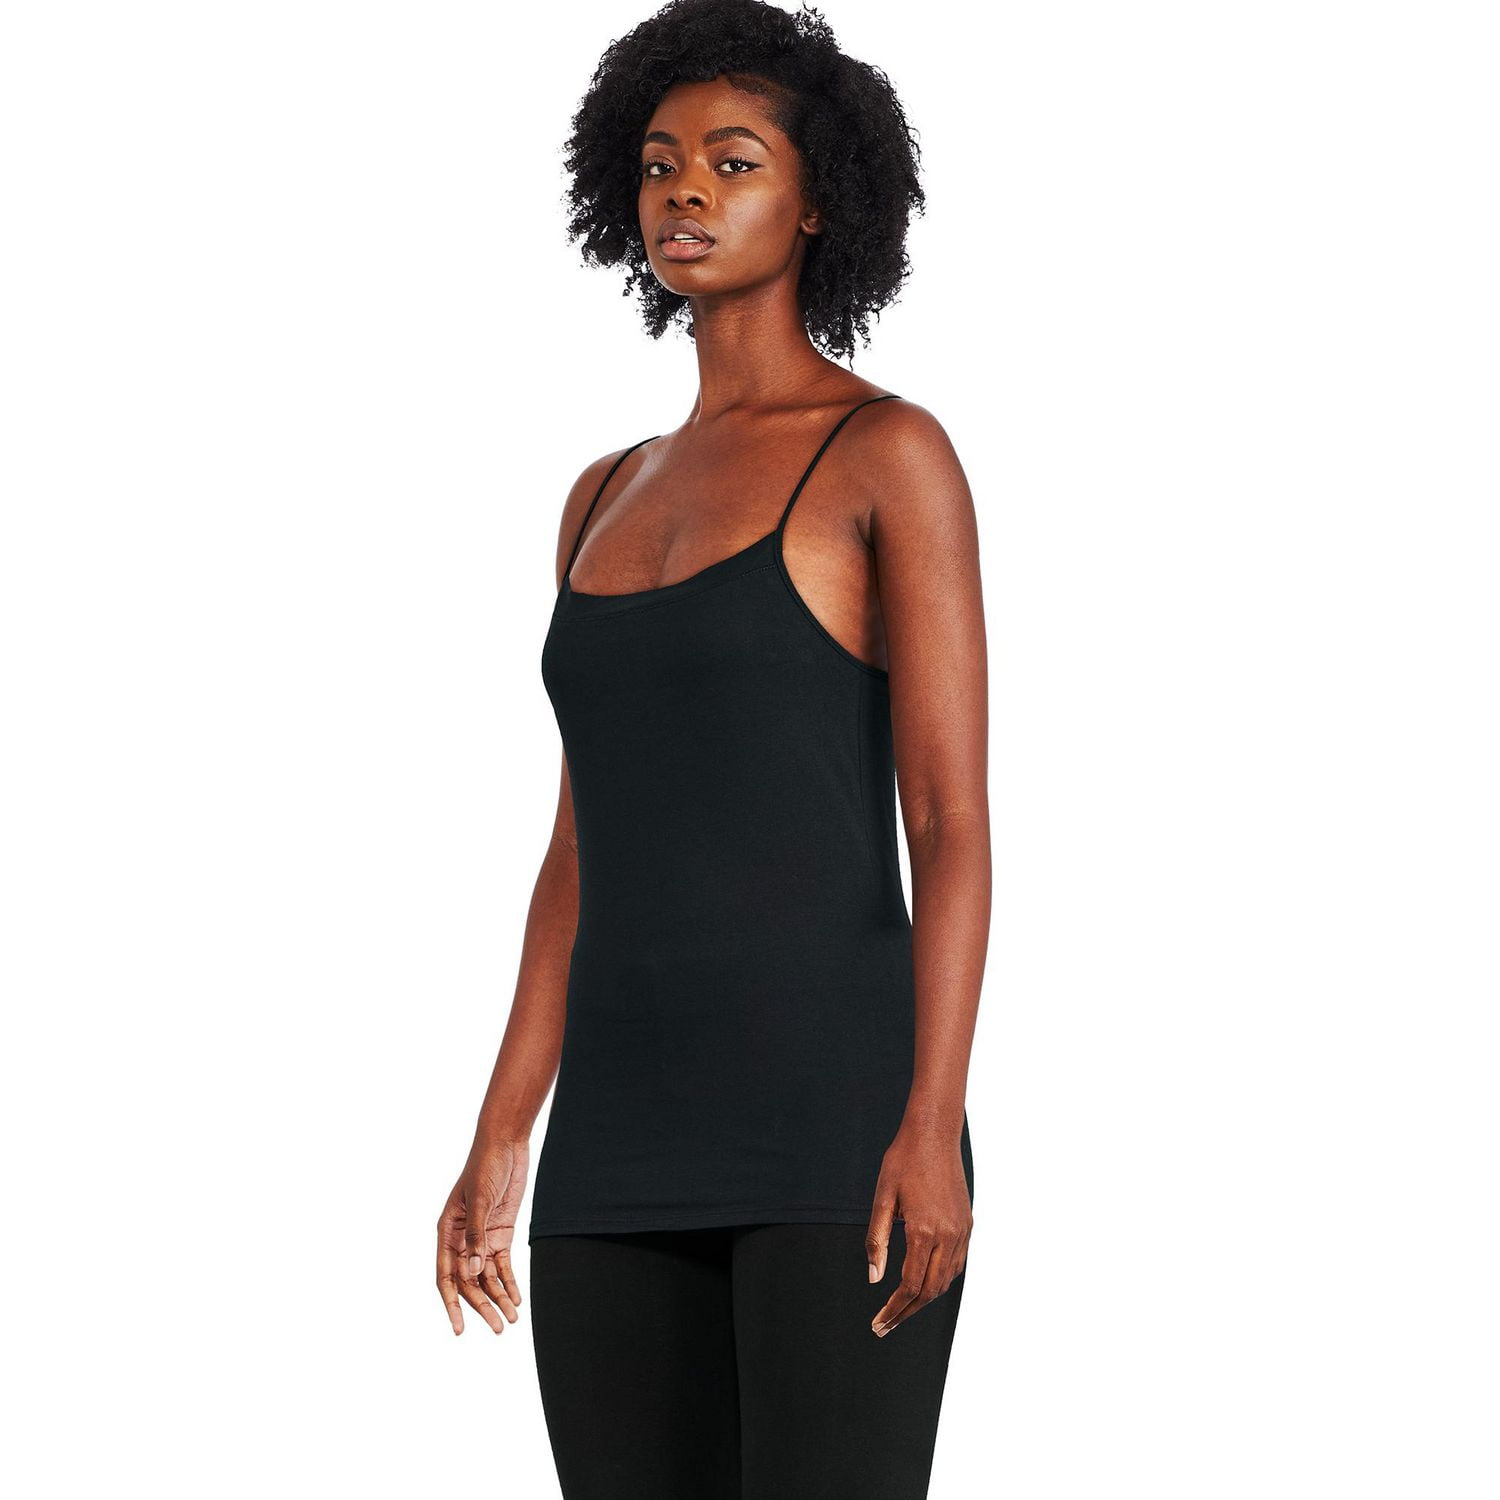 Buy Aimly Women's Cotton Camisole Slip Black XL Pack of 1 Online